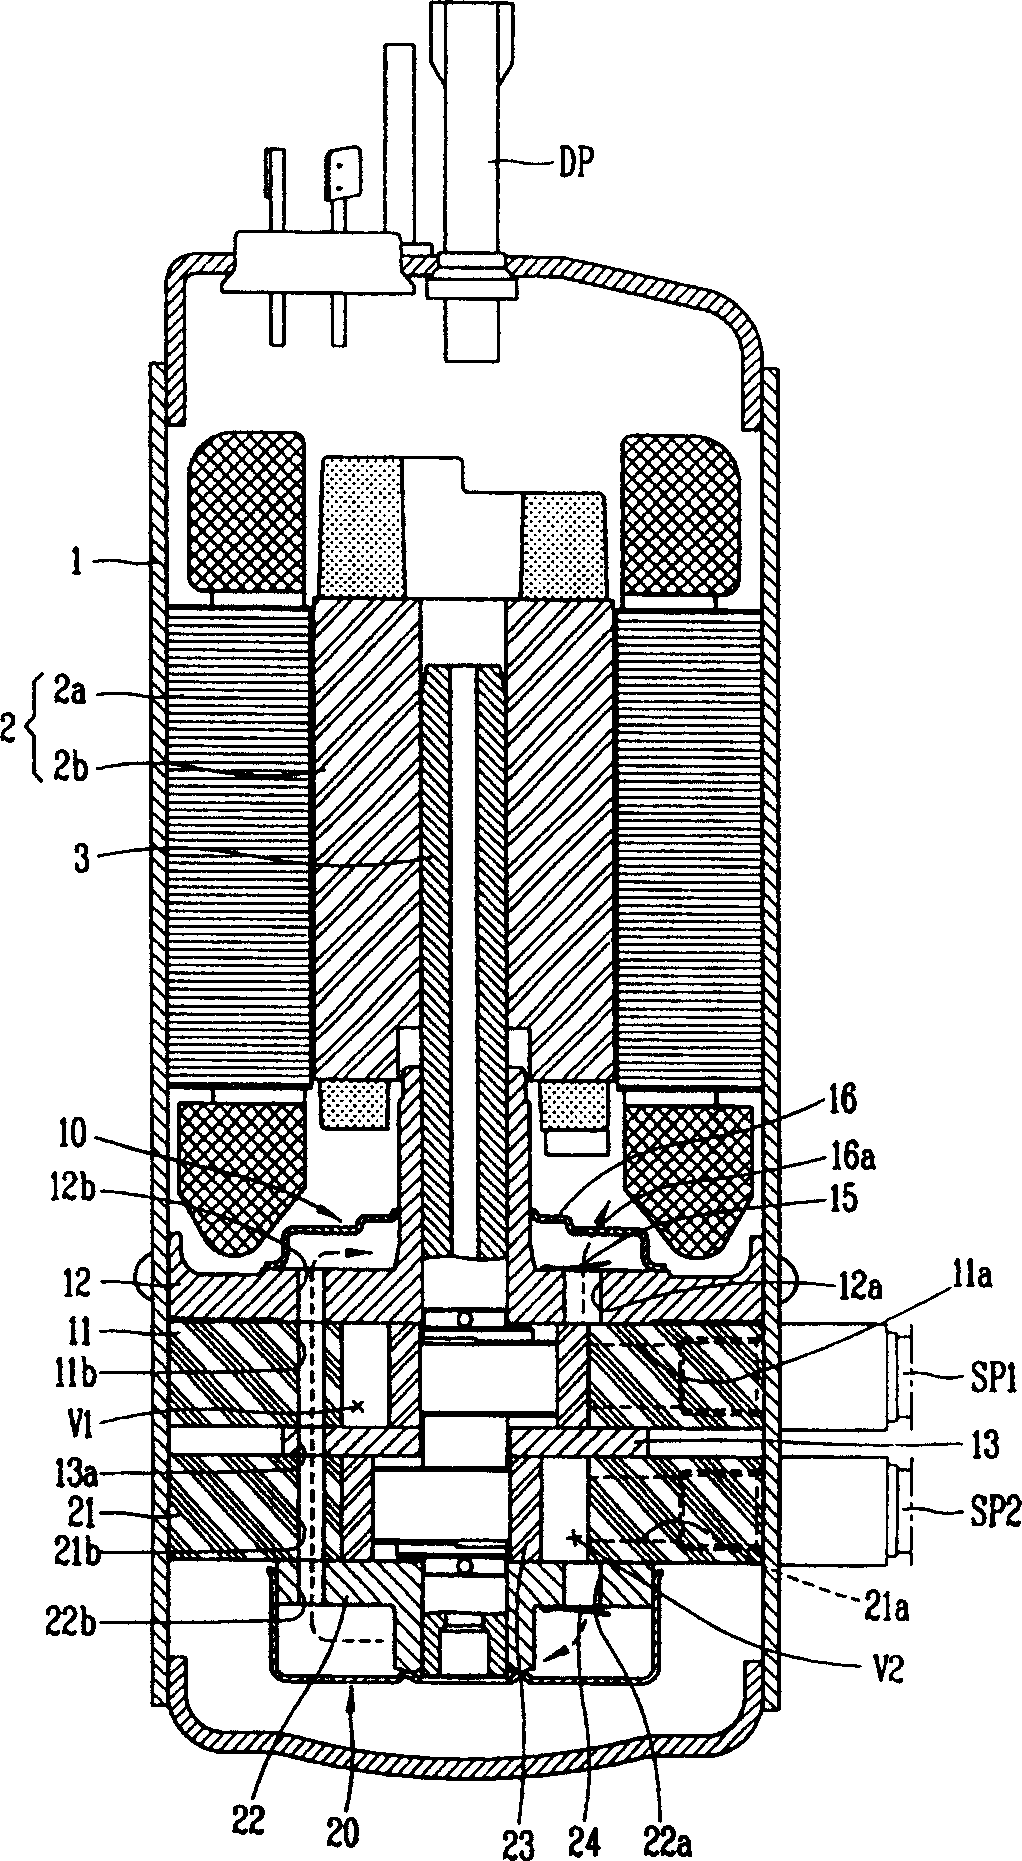 Discharging structure of reciprocating rotary compressor